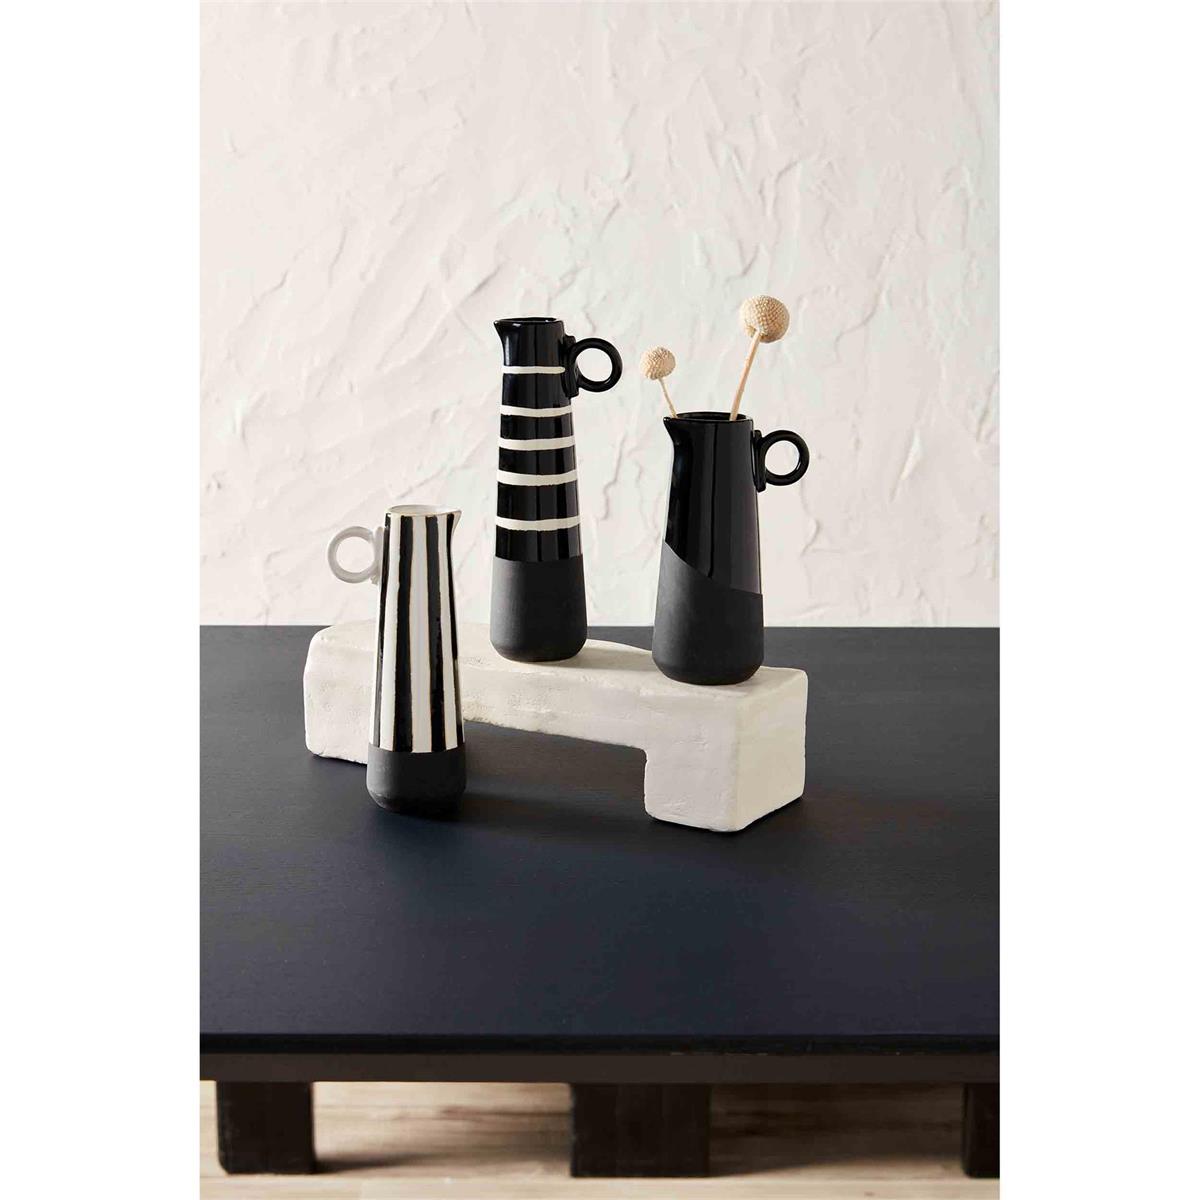 all three styles of black and white vases displayed on a black table with a white wood block against a white background